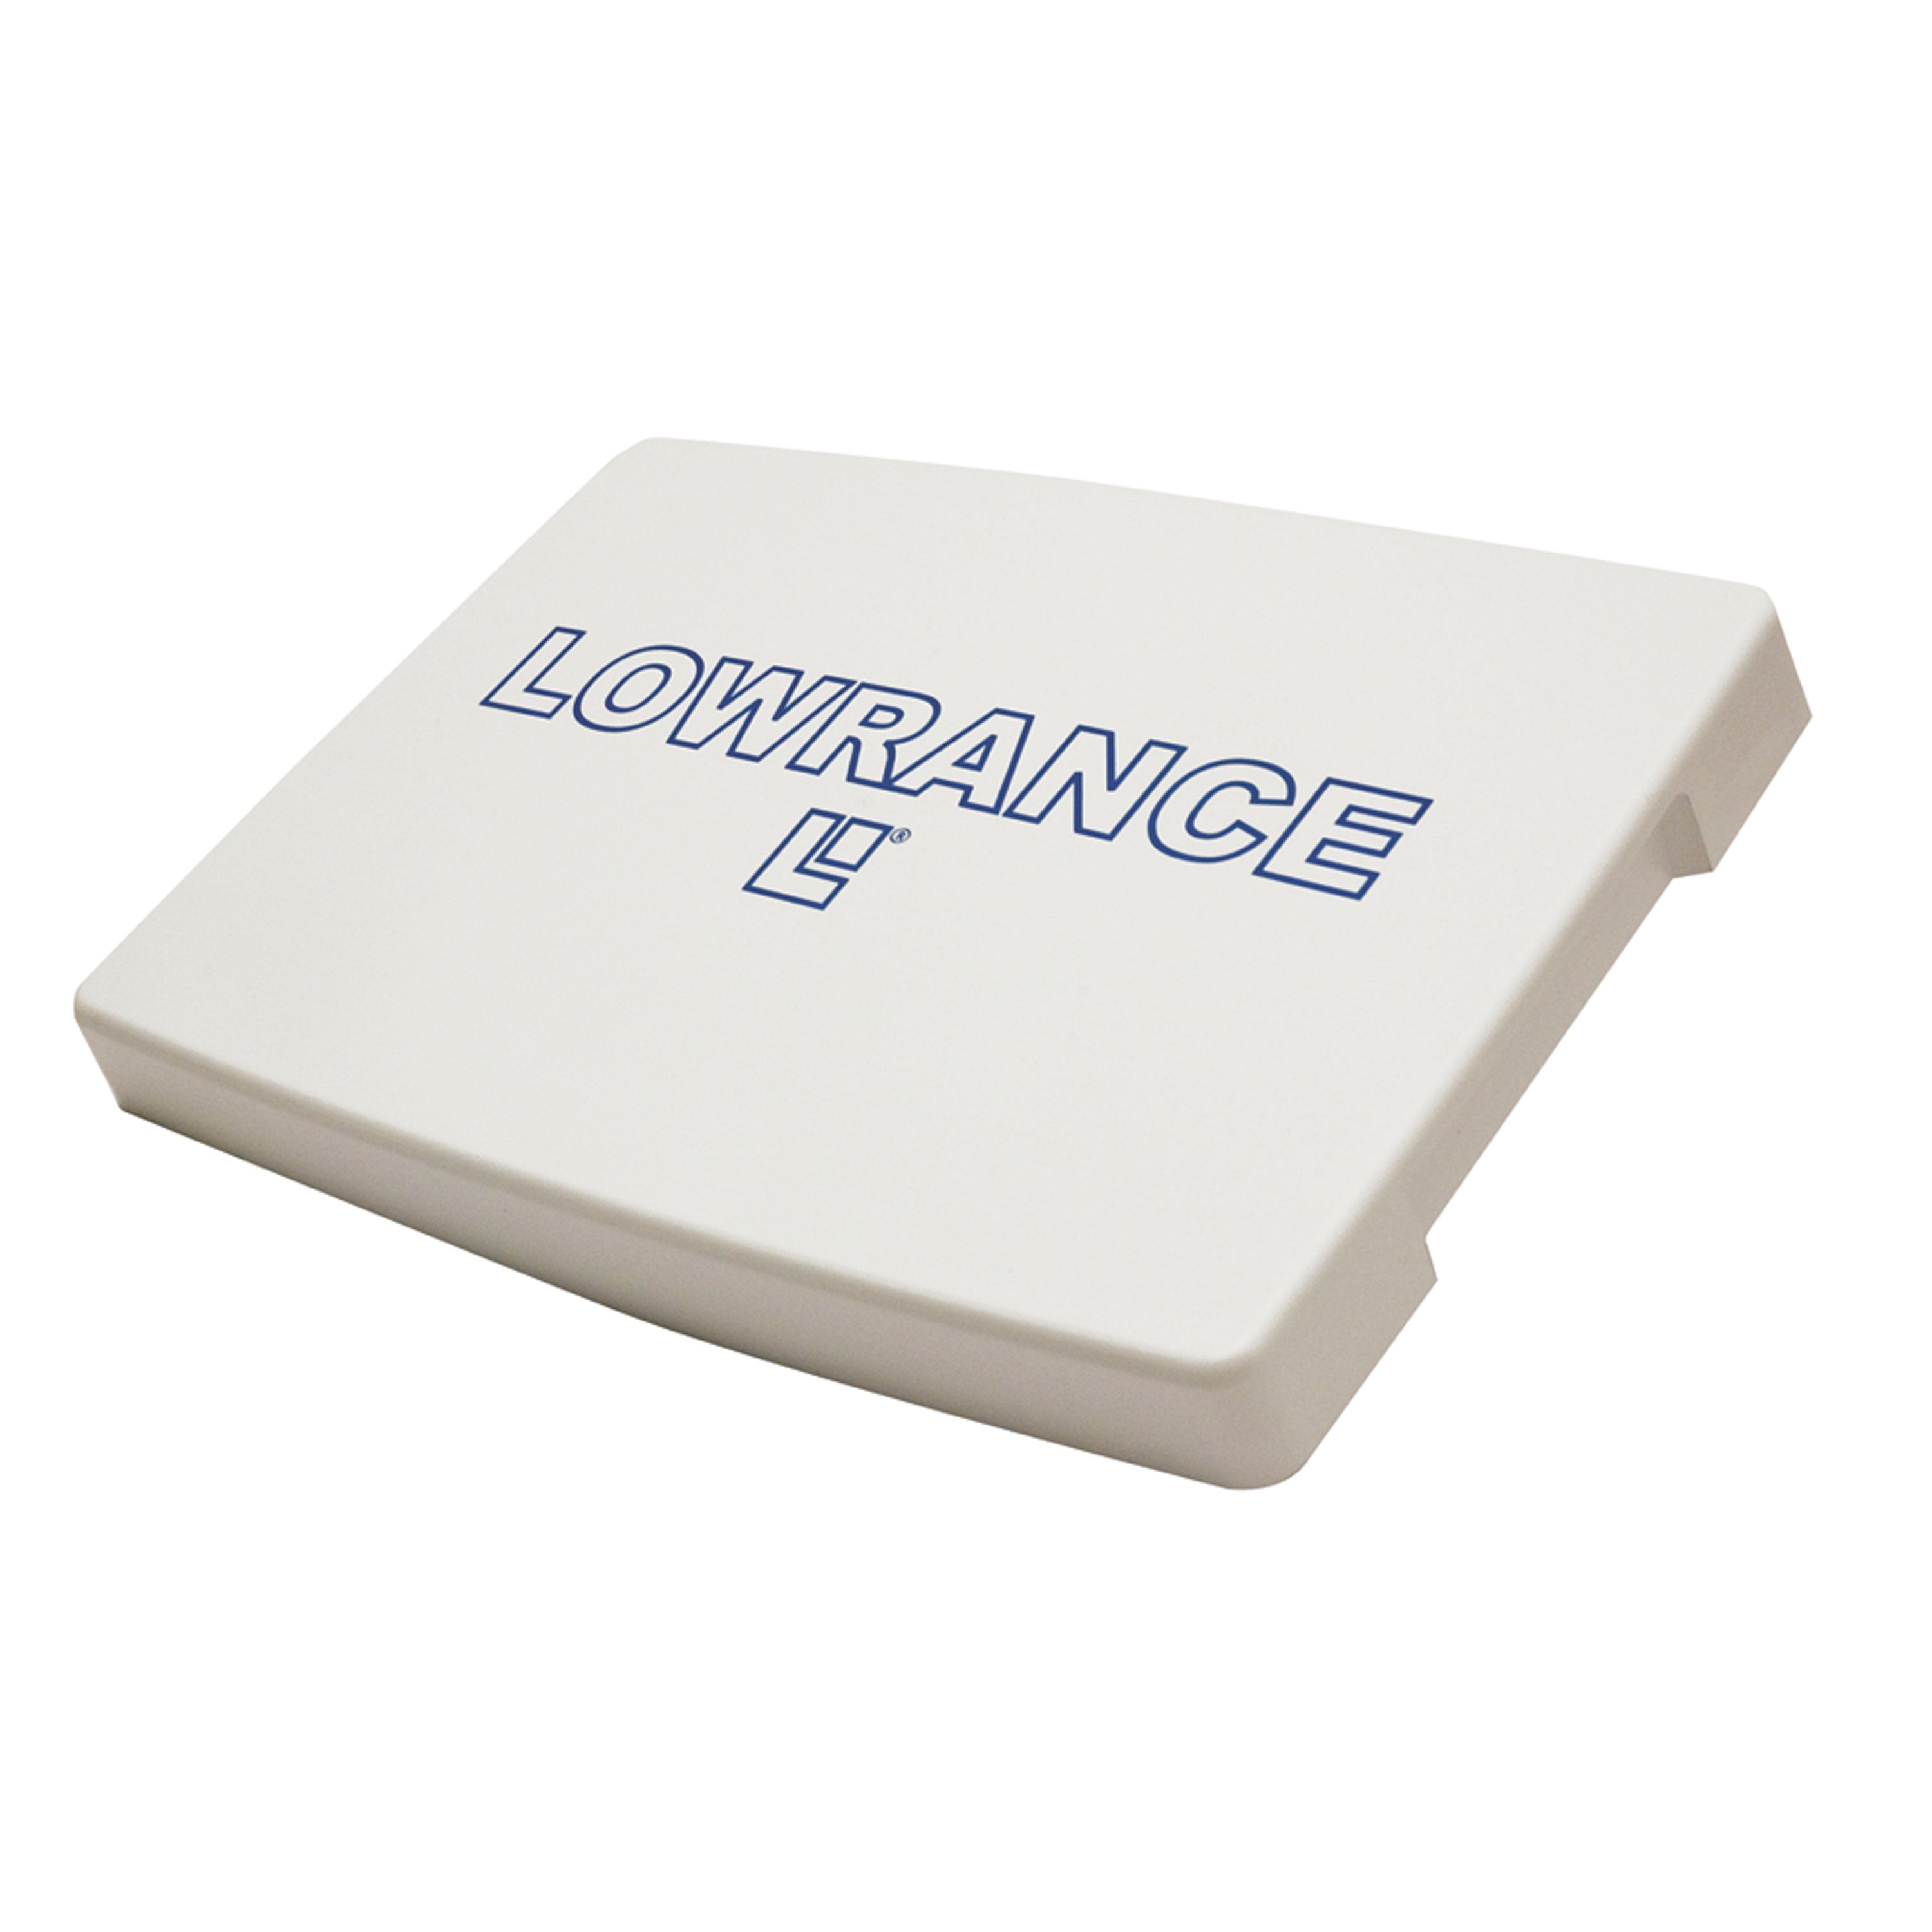 Lowrance 000-0124-64 Protective Cover for 10" Hds